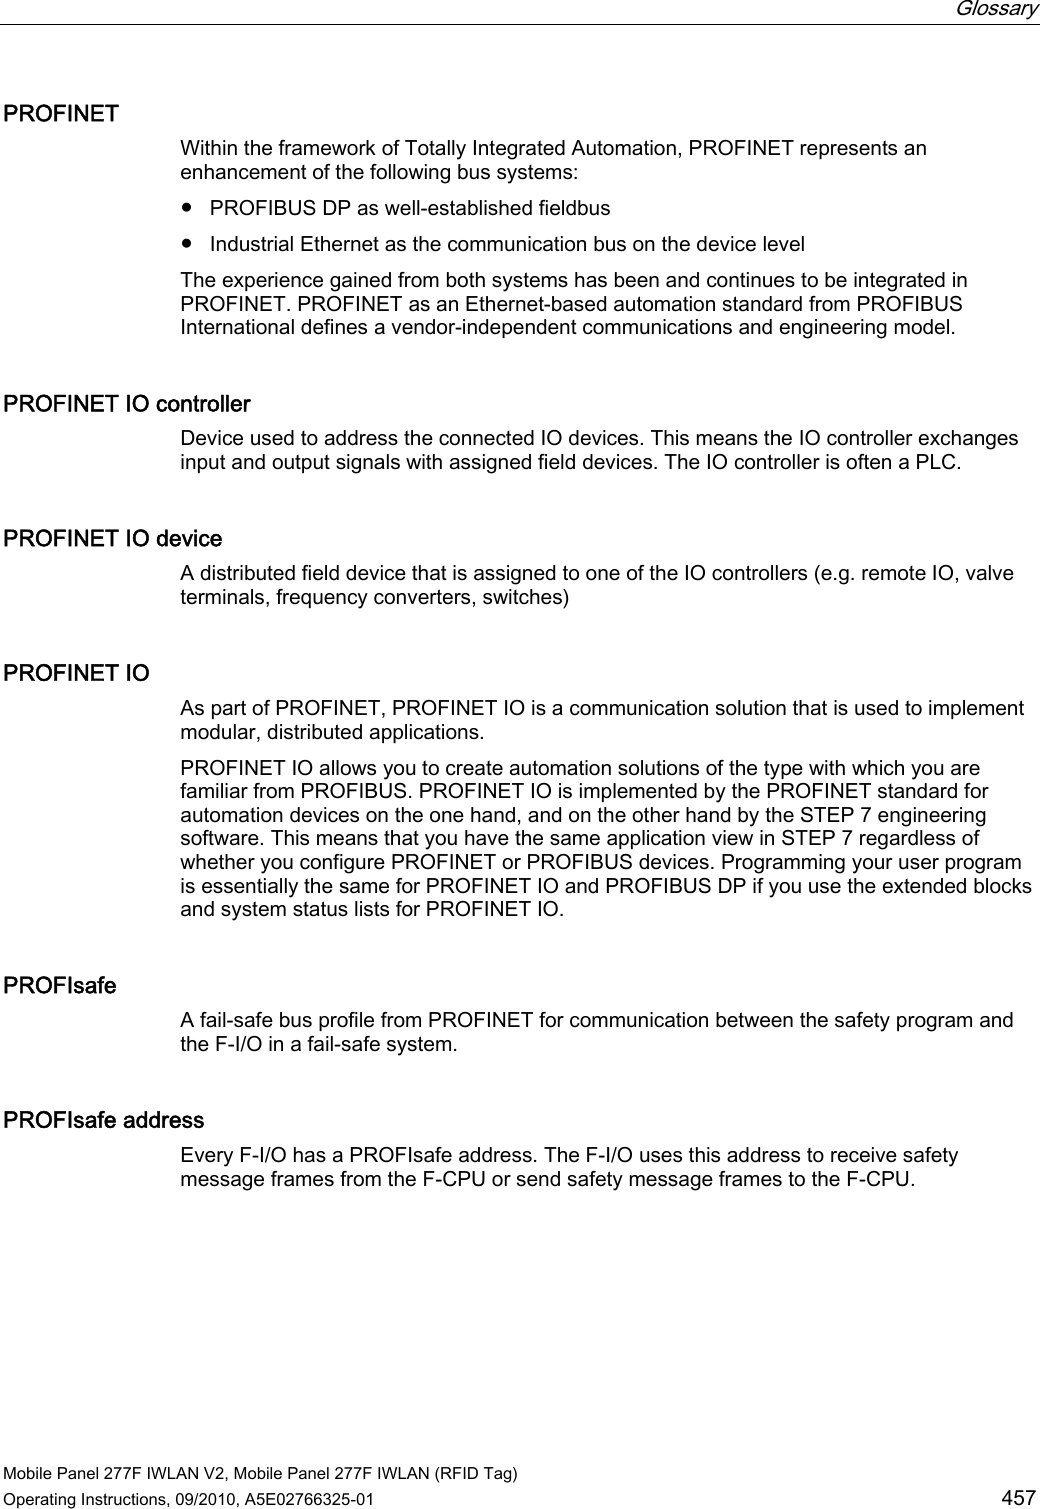  Glossary   Mobile Panel 277F IWLAN V2, Mobile Panel 277F IWLAN (RFID Tag) Operating Instructions, 09/2010, A5E02766325-01  457 PROFINET Within the framework of Totally Integrated Automation, PROFINET represents an enhancement of the following bus systems:  ● PROFIBUS DP as well-established fieldbus ● Industrial Ethernet as the communication bus on the device level The experience gained from both systems has been and continues to be integrated in PROFINET. PROFINET as an Ethernet-based automation standard from PROFIBUS International defines a vendor-independent communications and engineering model. PROFINET IO controller Device used to address the connected IO devices. This means the IO controller exchanges input and output signals with assigned field devices. The IO controller is often a PLC.  PROFINET IO device A distributed field device that is assigned to one of the IO controllers (e.g. remote IO, valve terminals, frequency converters, switches) PROFINET IO As part of PROFINET, PROFINET IO is a communication solution that is used to implement modular, distributed applications.  PROFINET IO allows you to create automation solutions of the type with which you are familiar from PROFIBUS. PROFINET IO is implemented by the PROFINET standard for automation devices on the one hand, and on the other hand by the STEP 7 engineering software. This means that you have the same application view in STEP 7 regardless of whether you configure PROFINET or PROFIBUS devices. Programming your user program is essentially the same for PROFINET IO and PROFIBUS DP if you use the extended blocks and system status lists for PROFINET IO. PROFIsafe A fail-safe bus profile from PROFINET for communication between the safety program and the F-I/O in a fail-safe system. PROFIsafe address Every F-I/O has a PROFIsafe address. The F-I/O uses this address to receive safety message frames from the F-CPU or send safety message frames to the F-CPU. REVIEW ENGLISH 27.07.2010